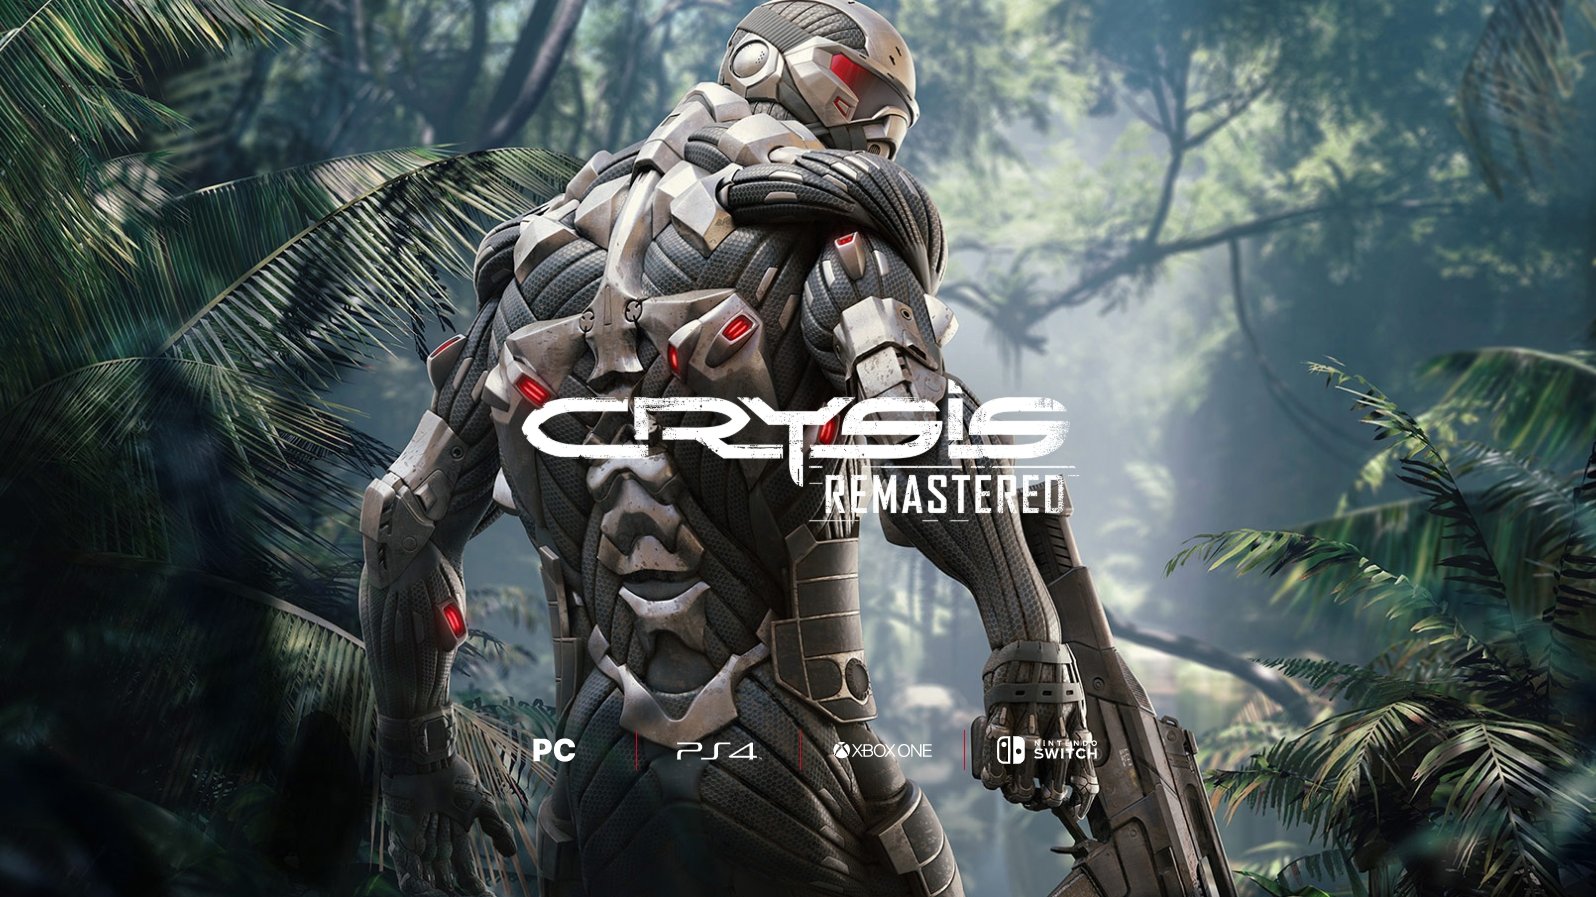 download free crysis 3 remastered ps4